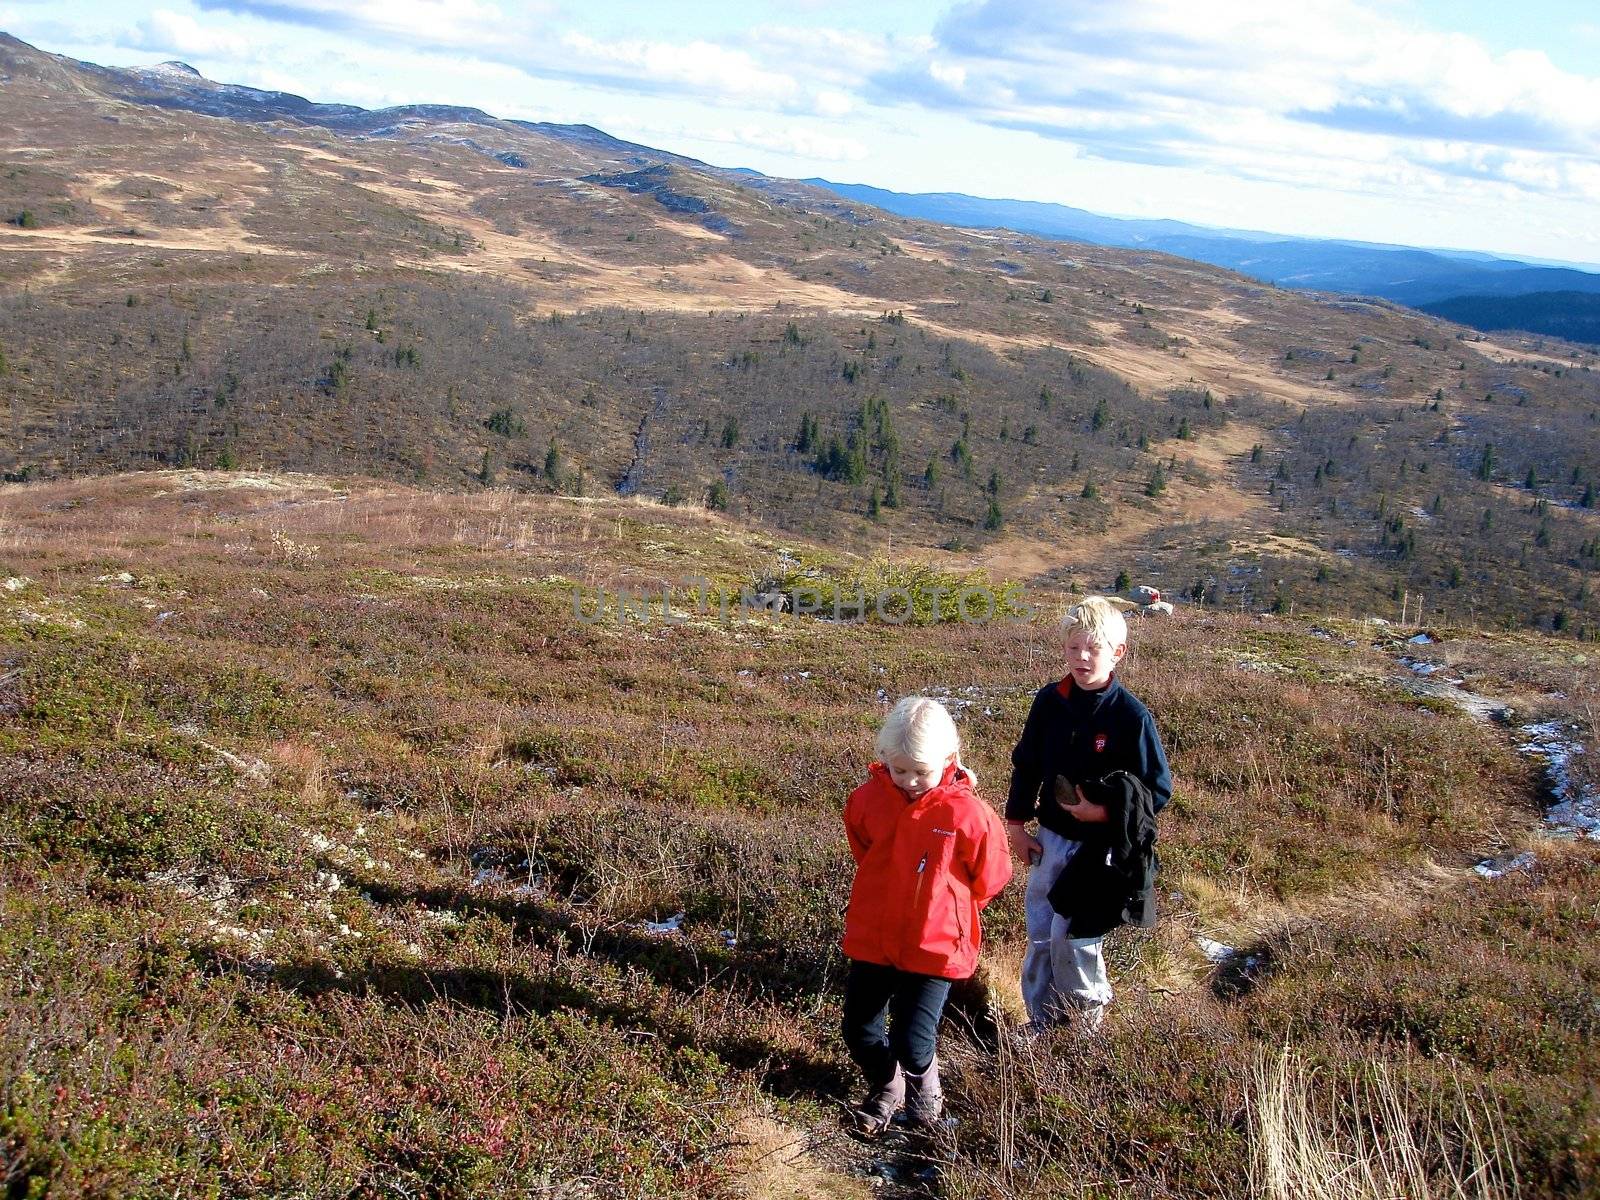 children hiking on the mountain. Please note: No negative use allowed.